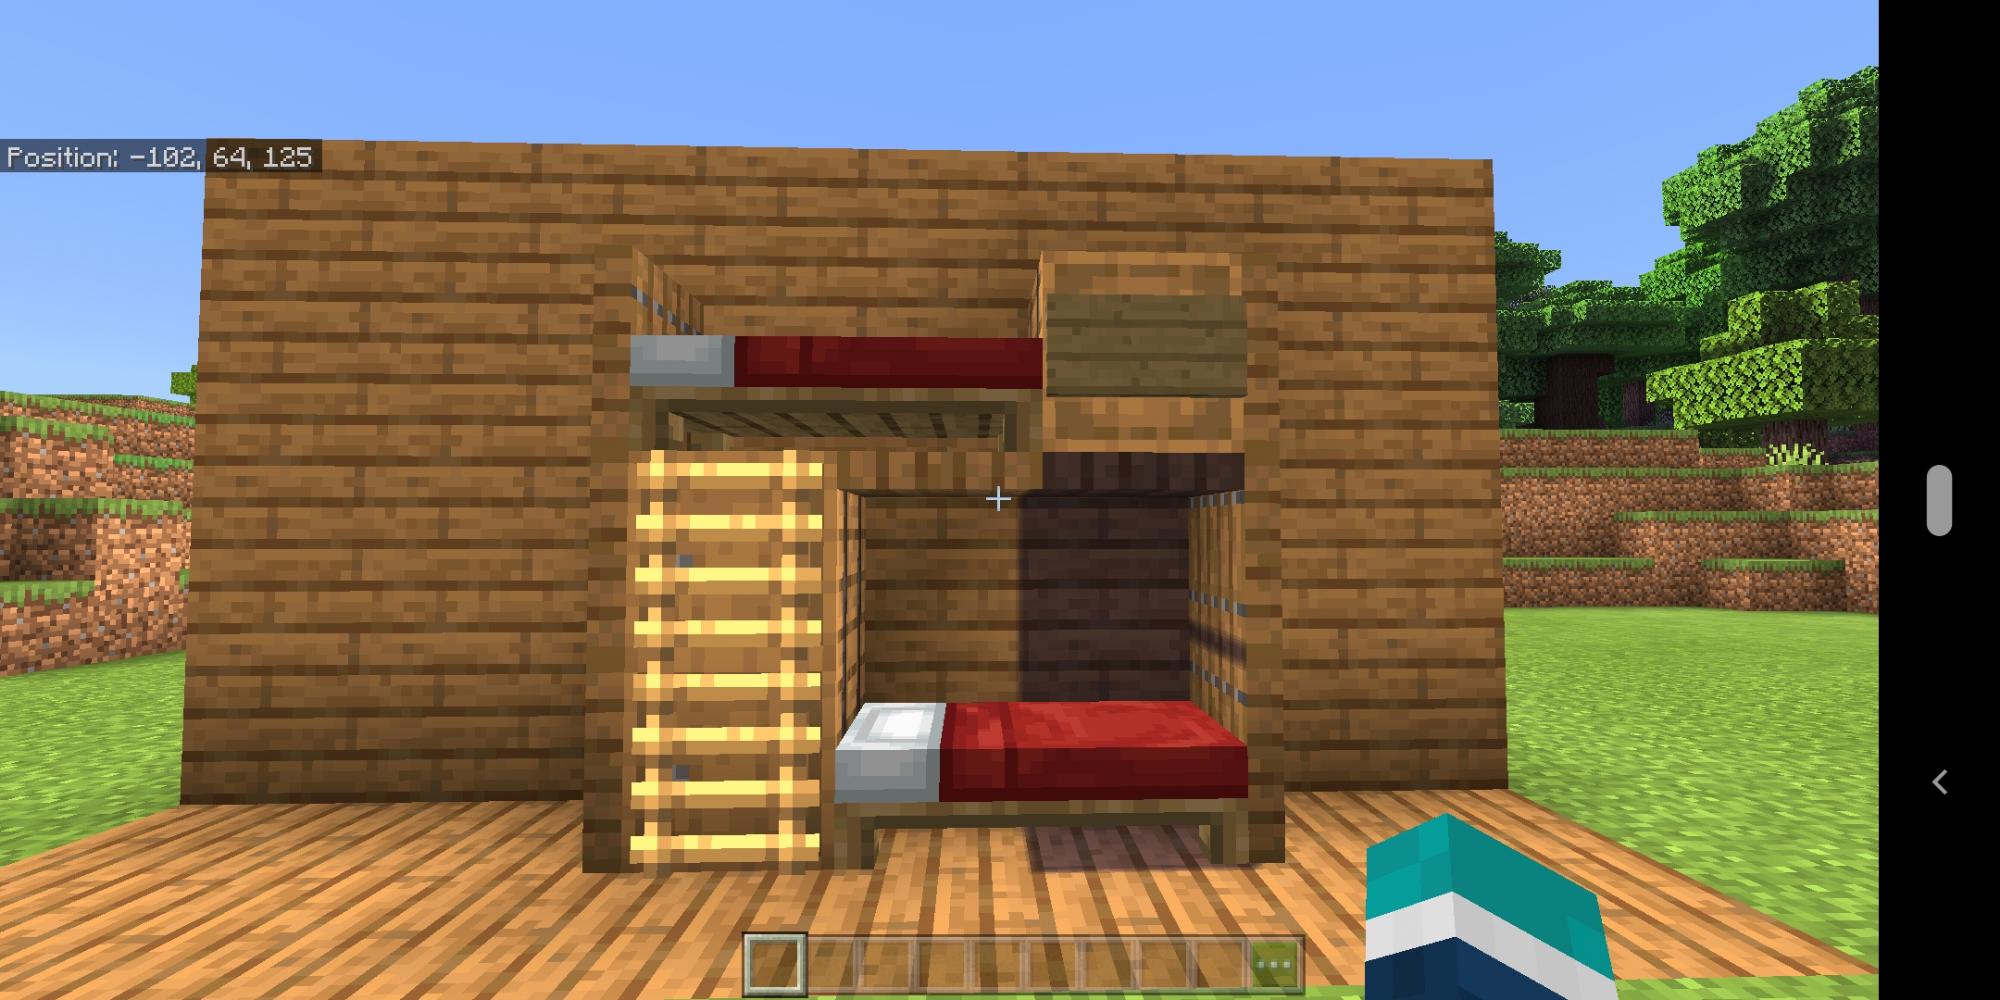 This Bunk Bed I Made Fandom, How To Make A Bunk Bed In Minecraft